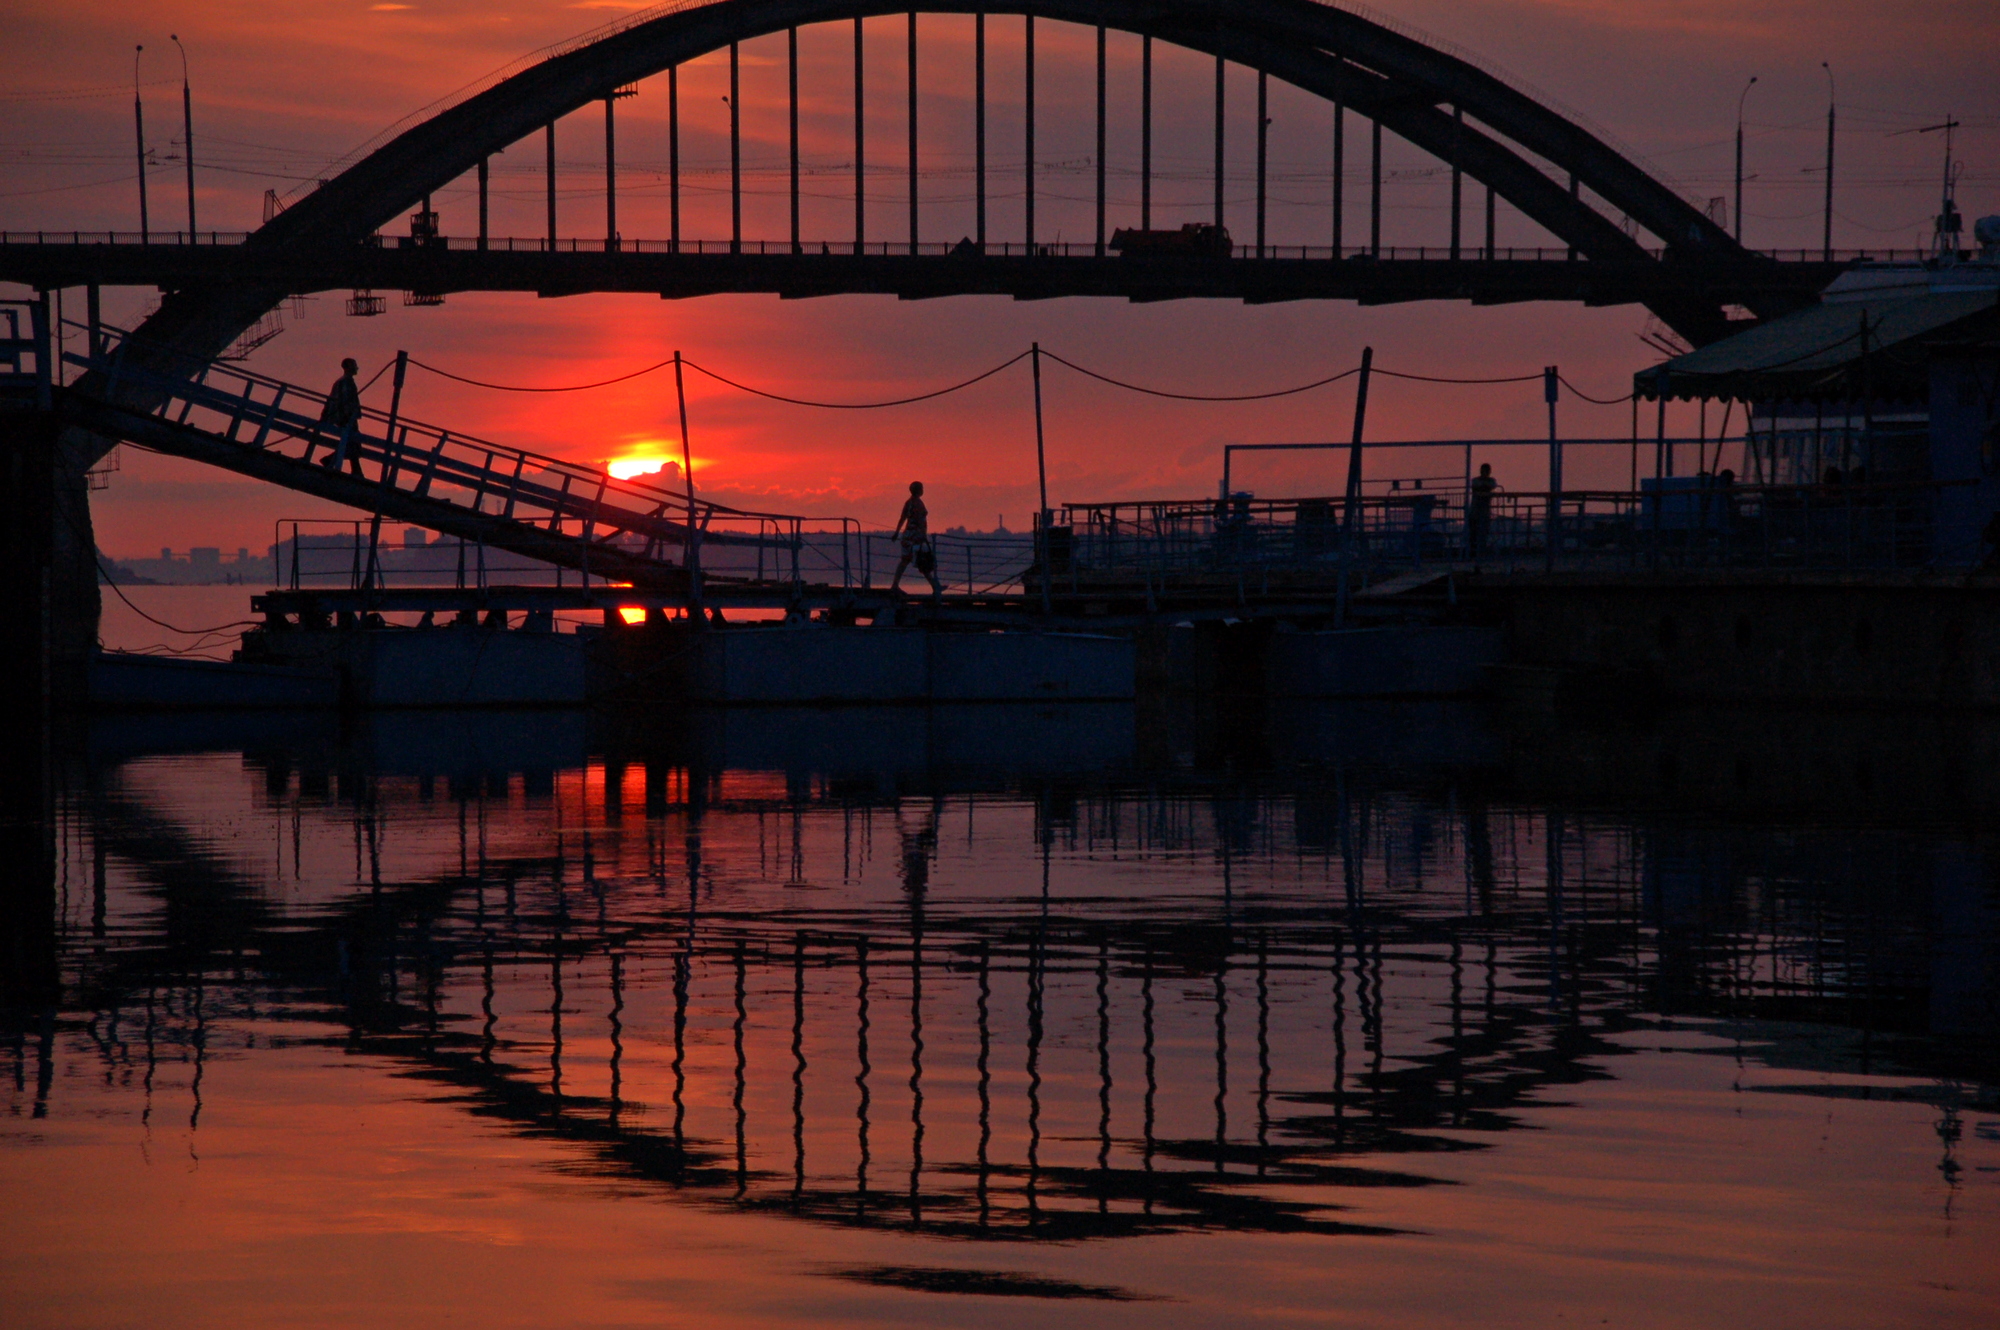 General 2000x1330 architecture building photography bridge river reflection sunset people silhouette